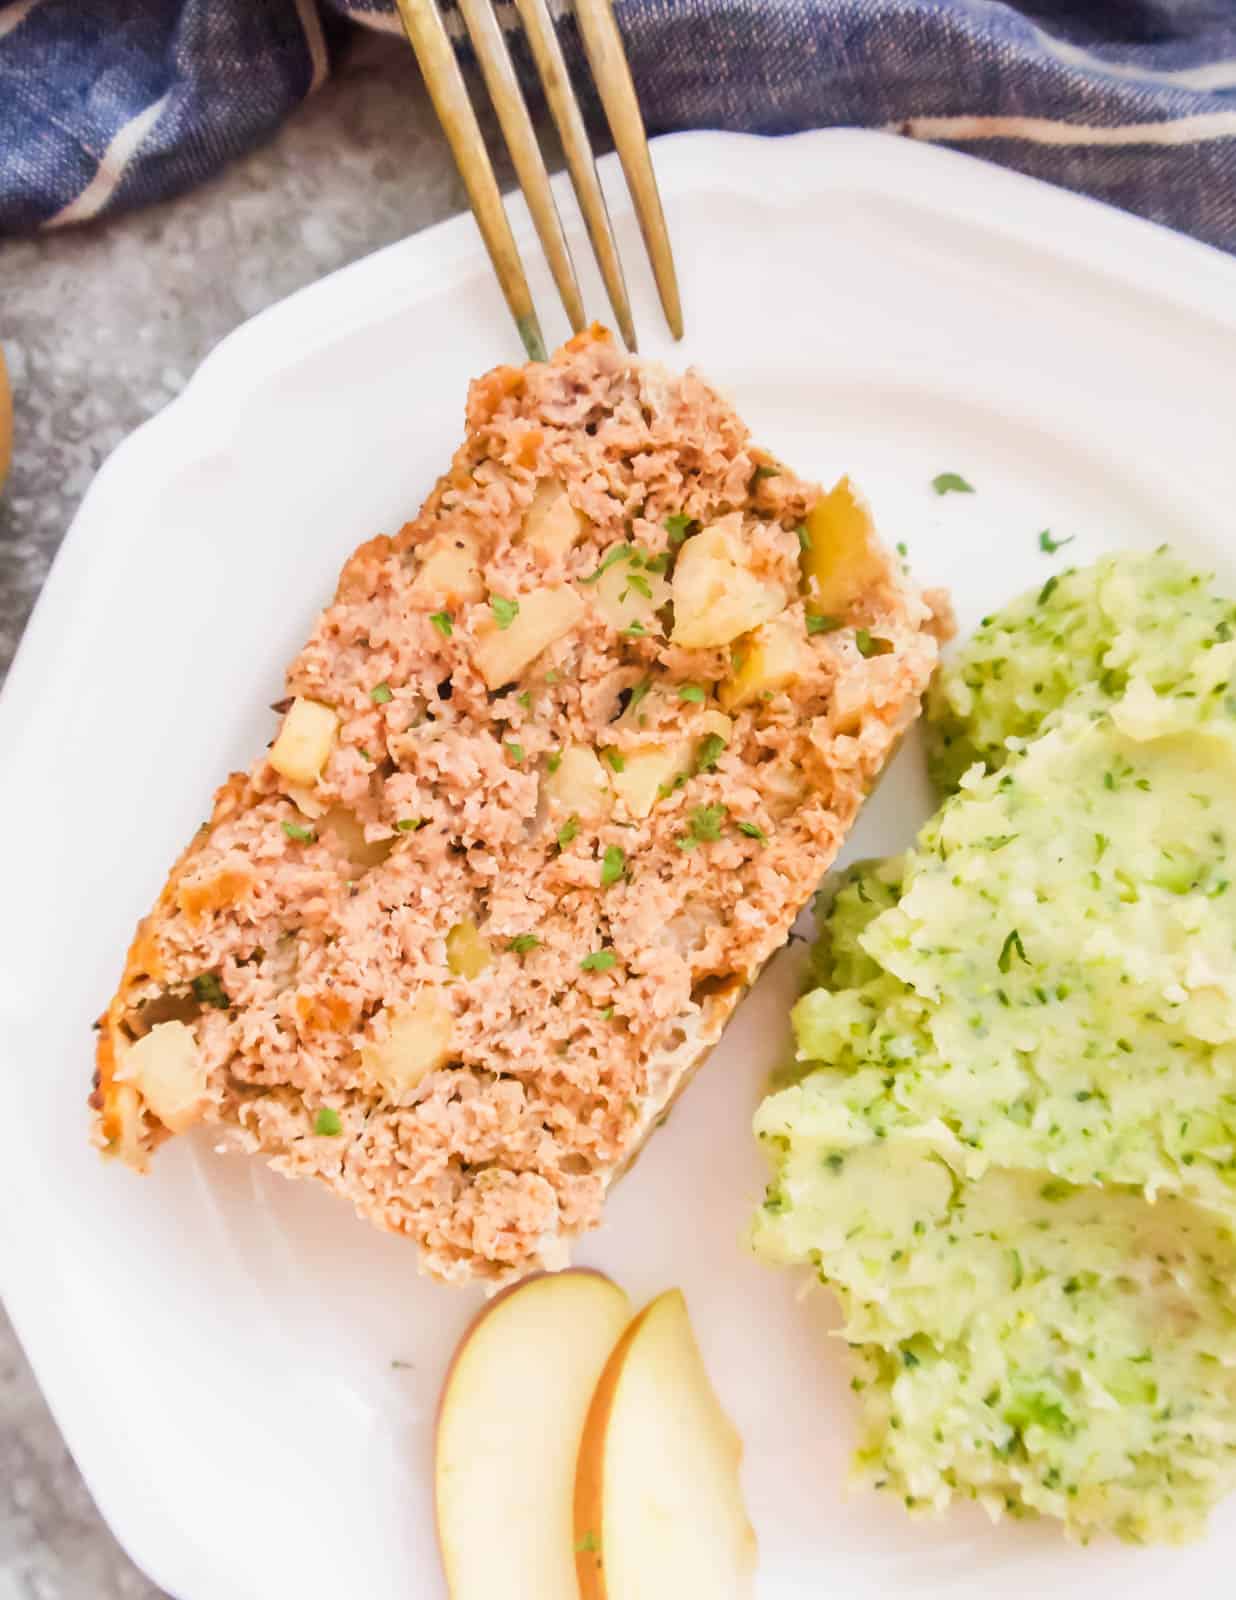 A slice of turkey apple meatloaf on a plate.